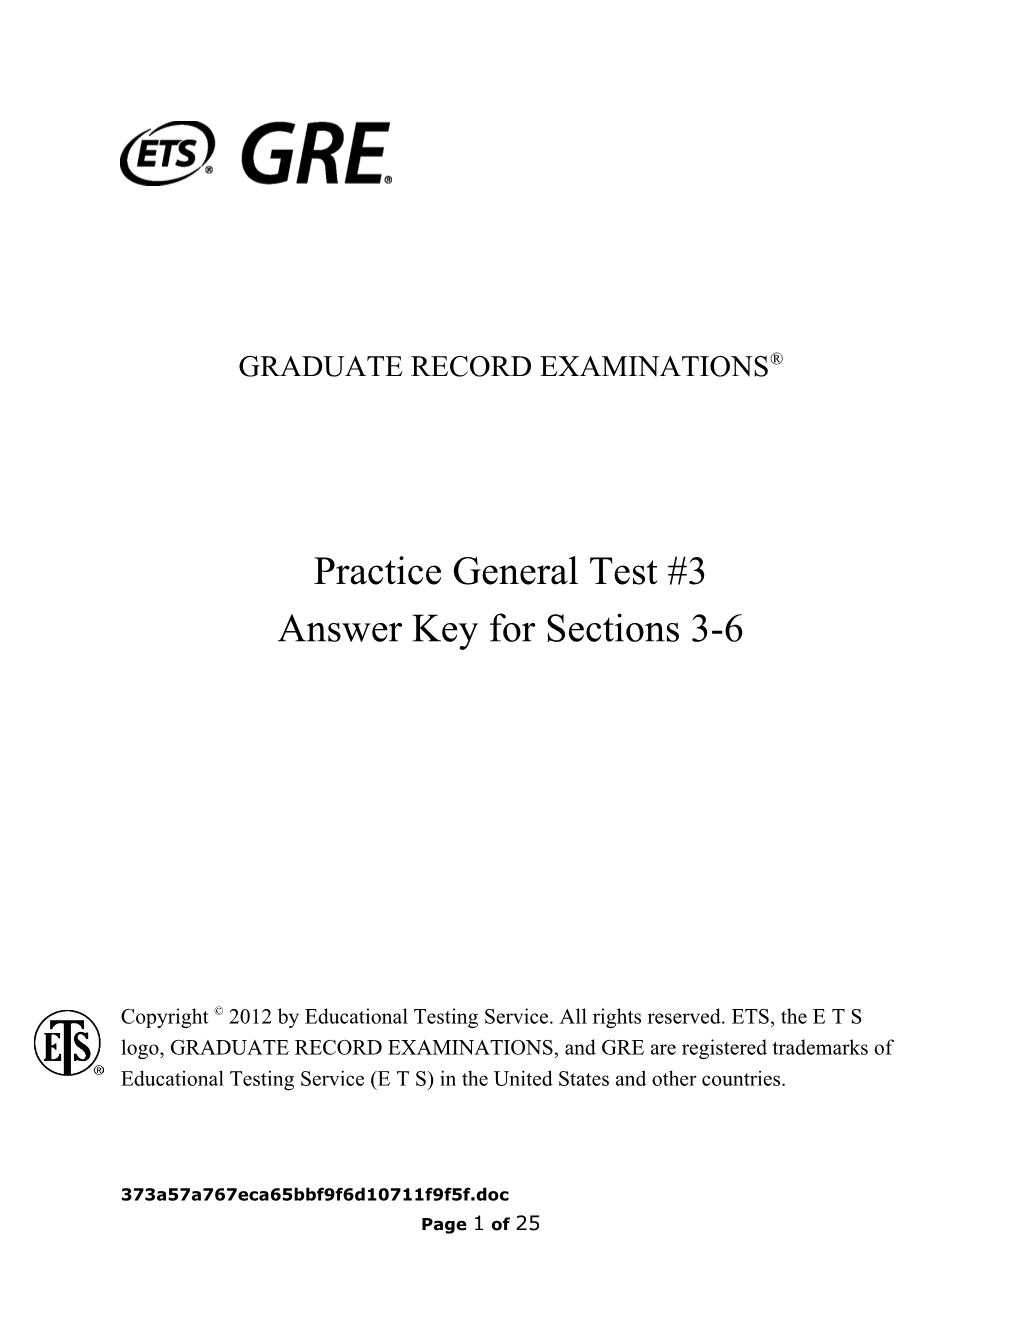 GRE Practice Test 3 Answers